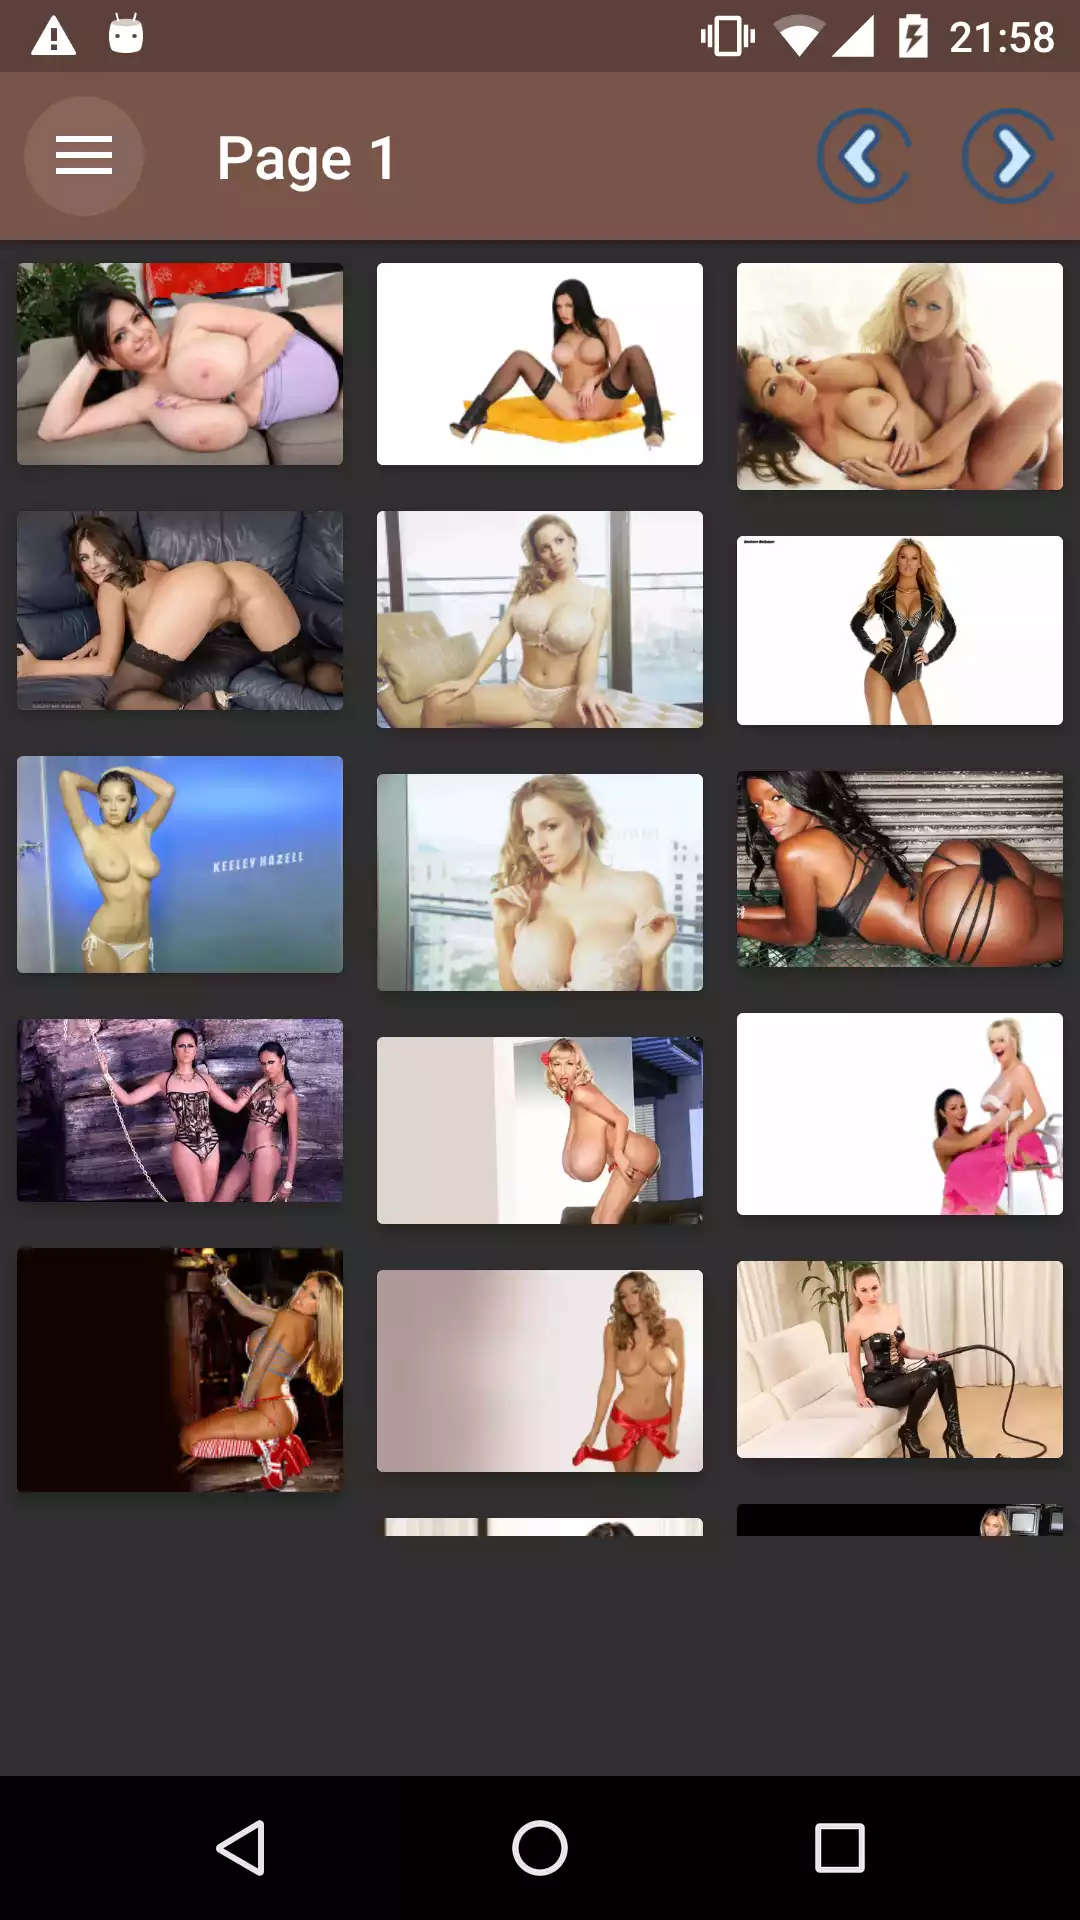 Glamour Wallpapers apks,picx,pics,sexy,wallpapers,download,hot,pictures,photo,apk,adult,picture,android,porn,photos,apps,hentai,top,anime